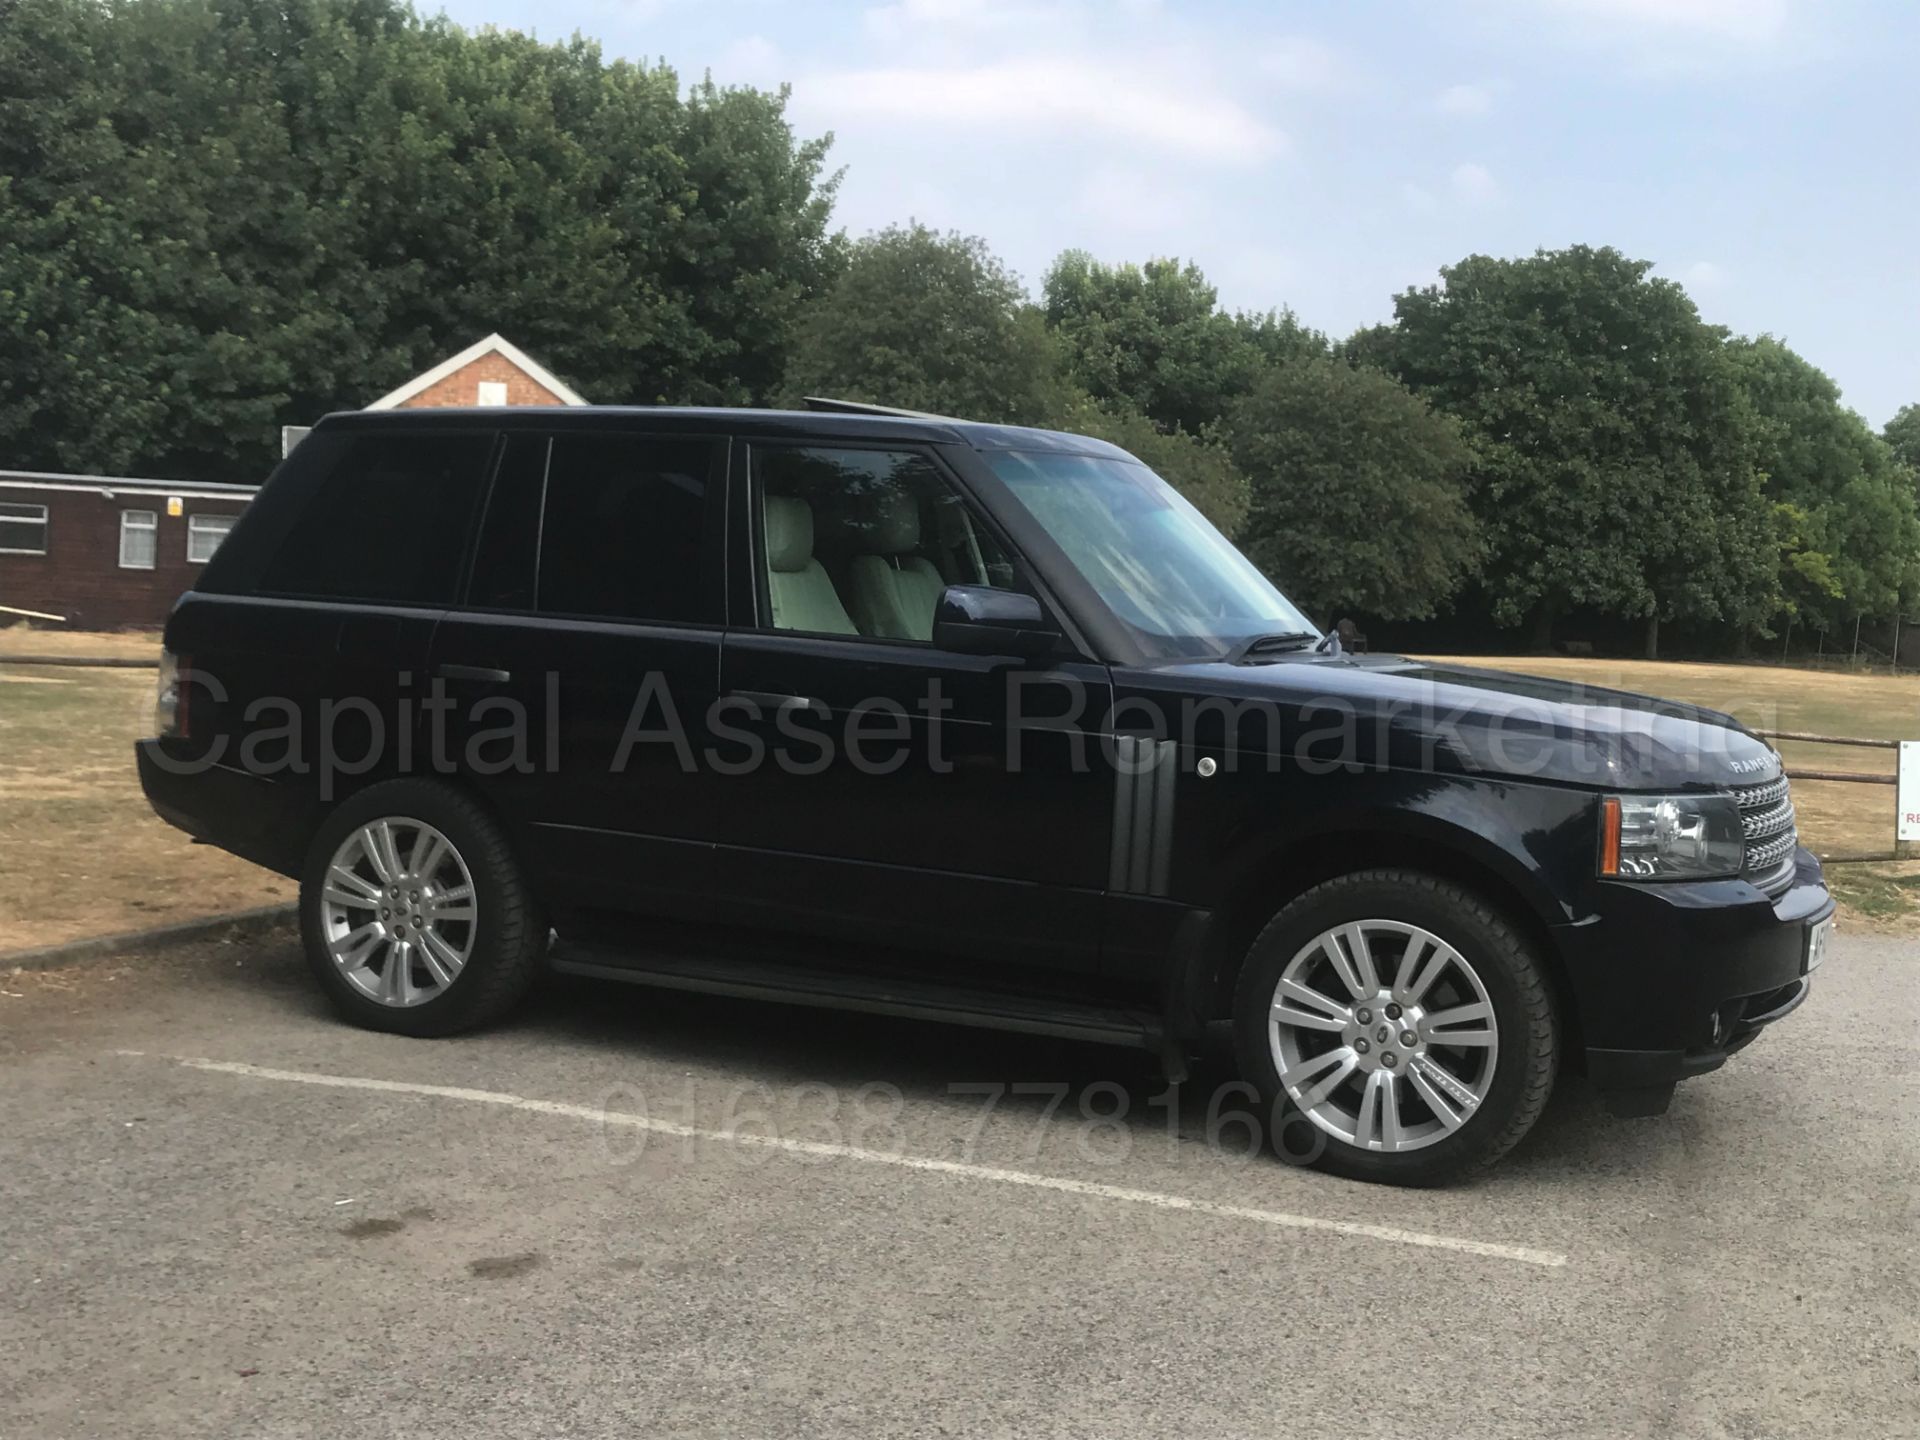 (On Sale) RANGE ROVER VOGUE **SE EDITION** (2010 - FACELIFT EDITION) 'TDV8 - 268 BHP - AUTO' **WOW** - Image 13 of 62